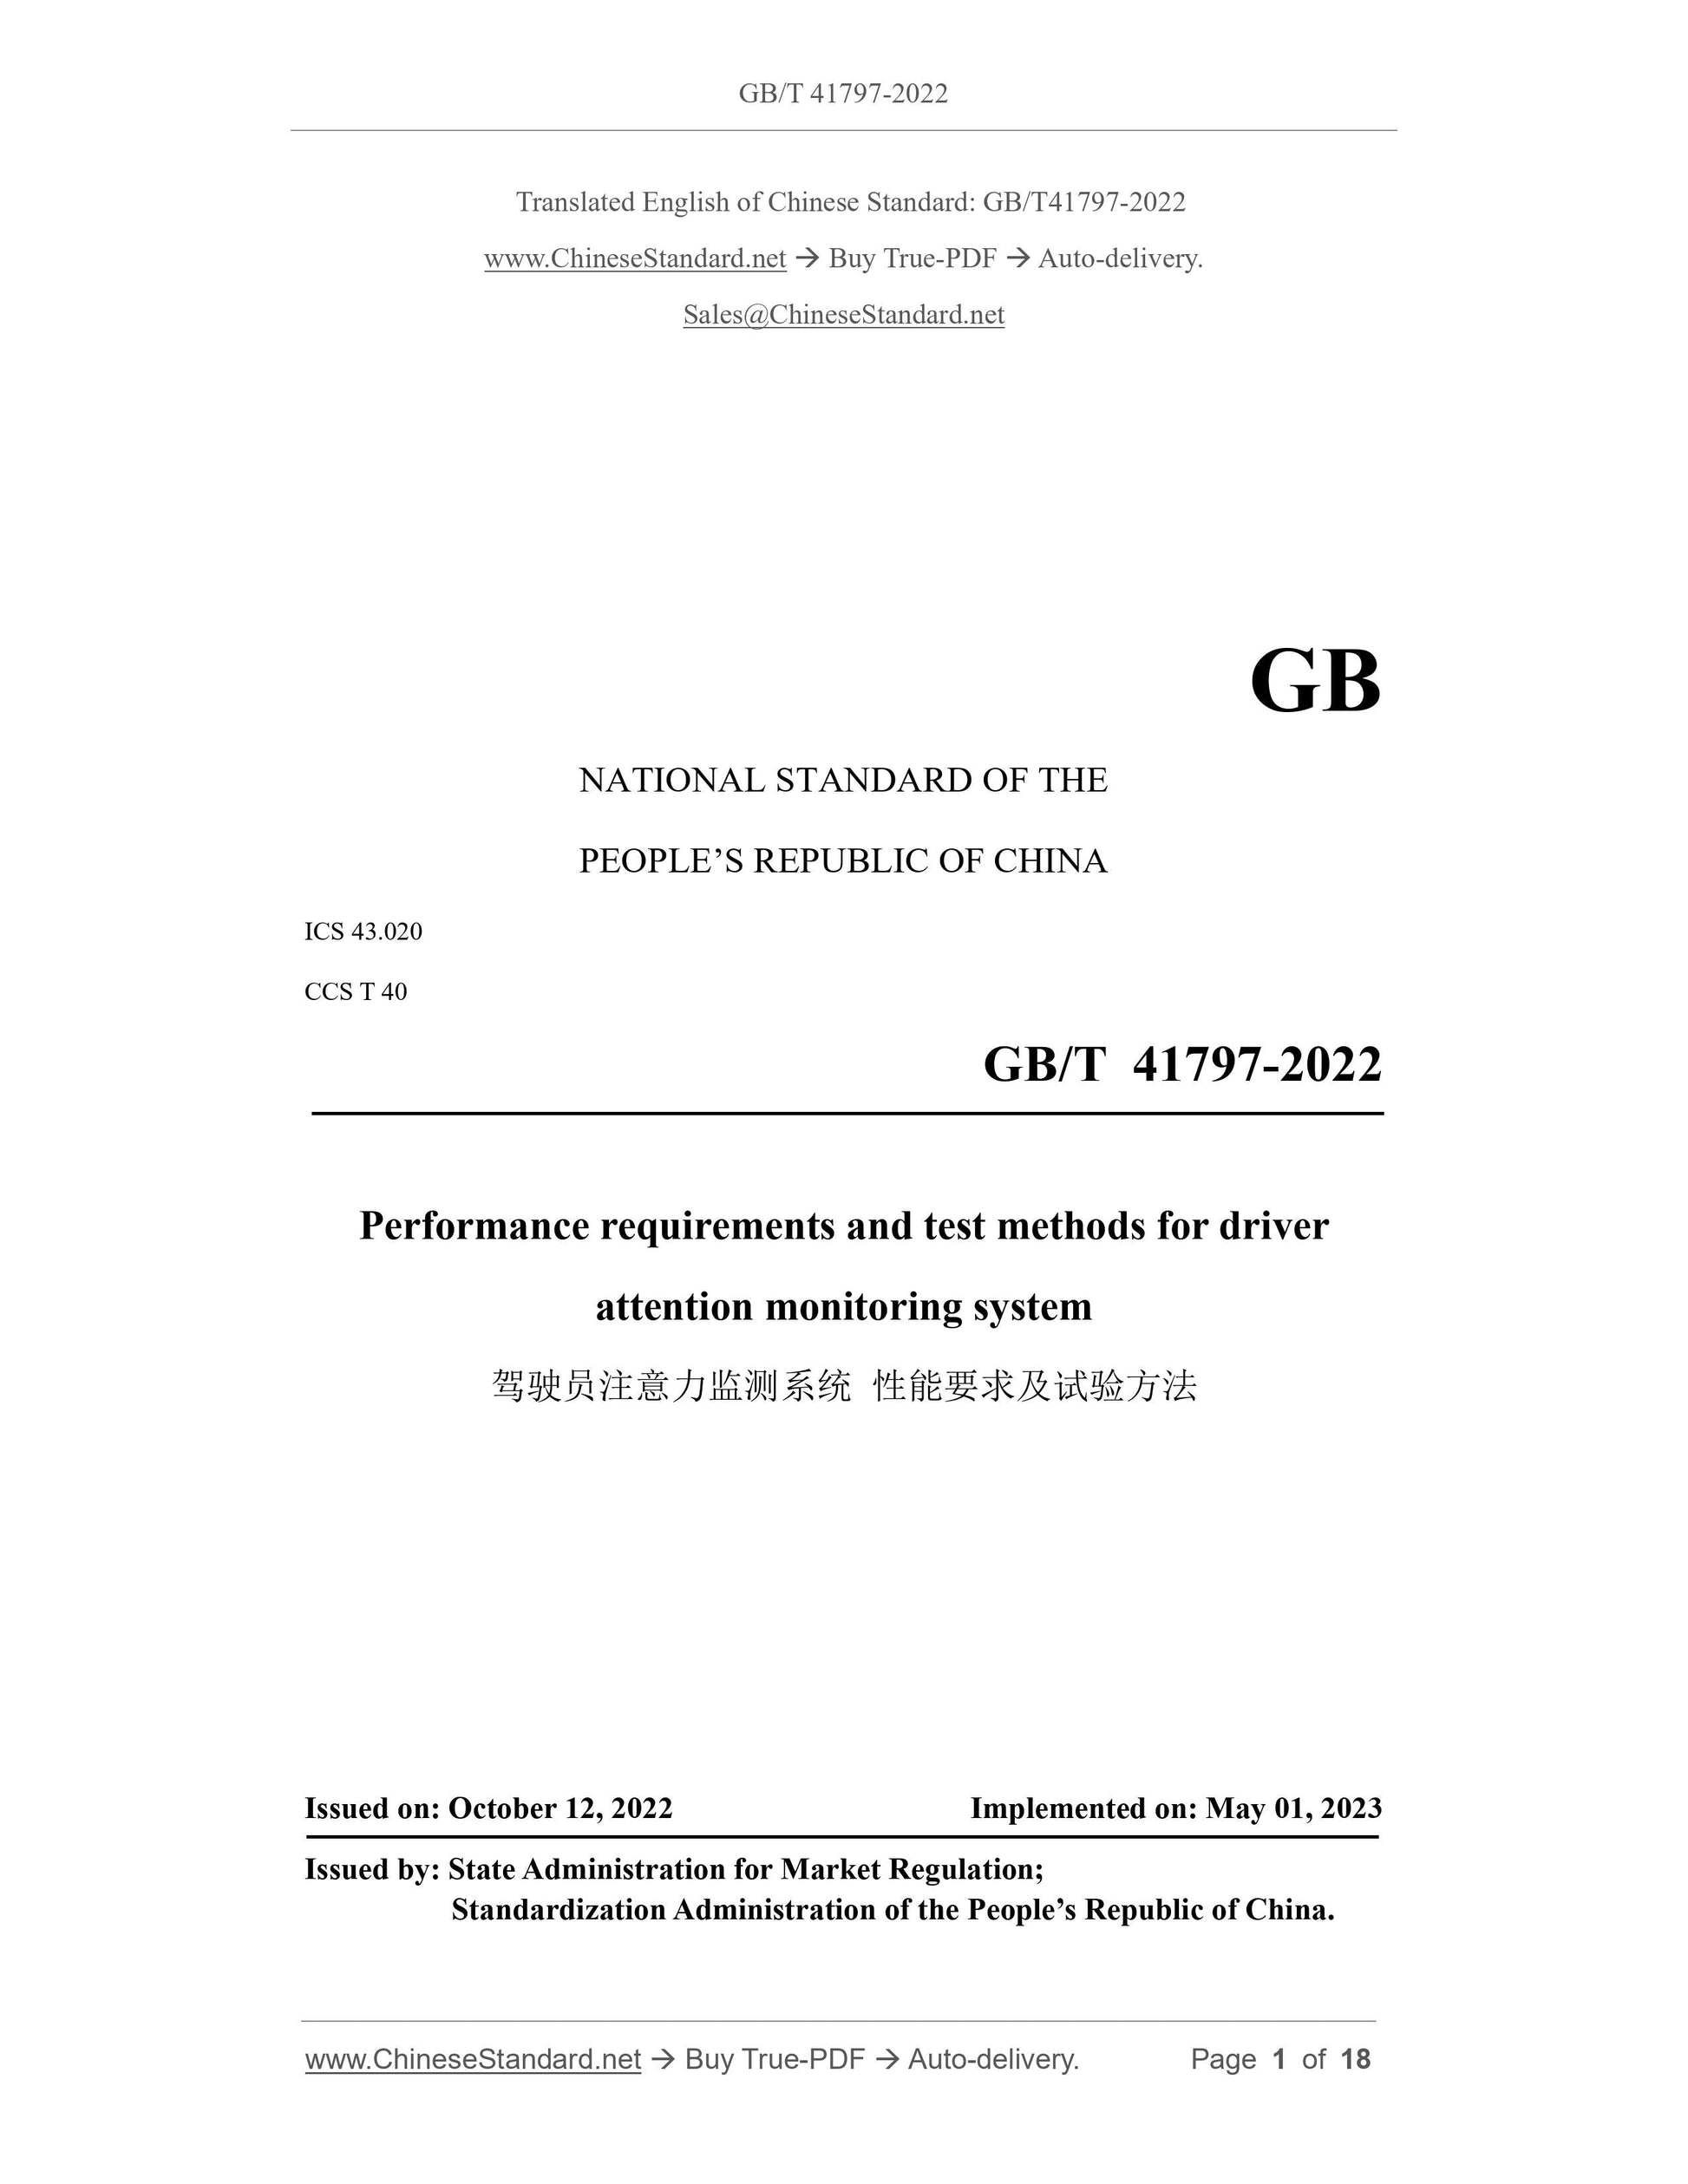 GB/T 41797-2022 Page 1